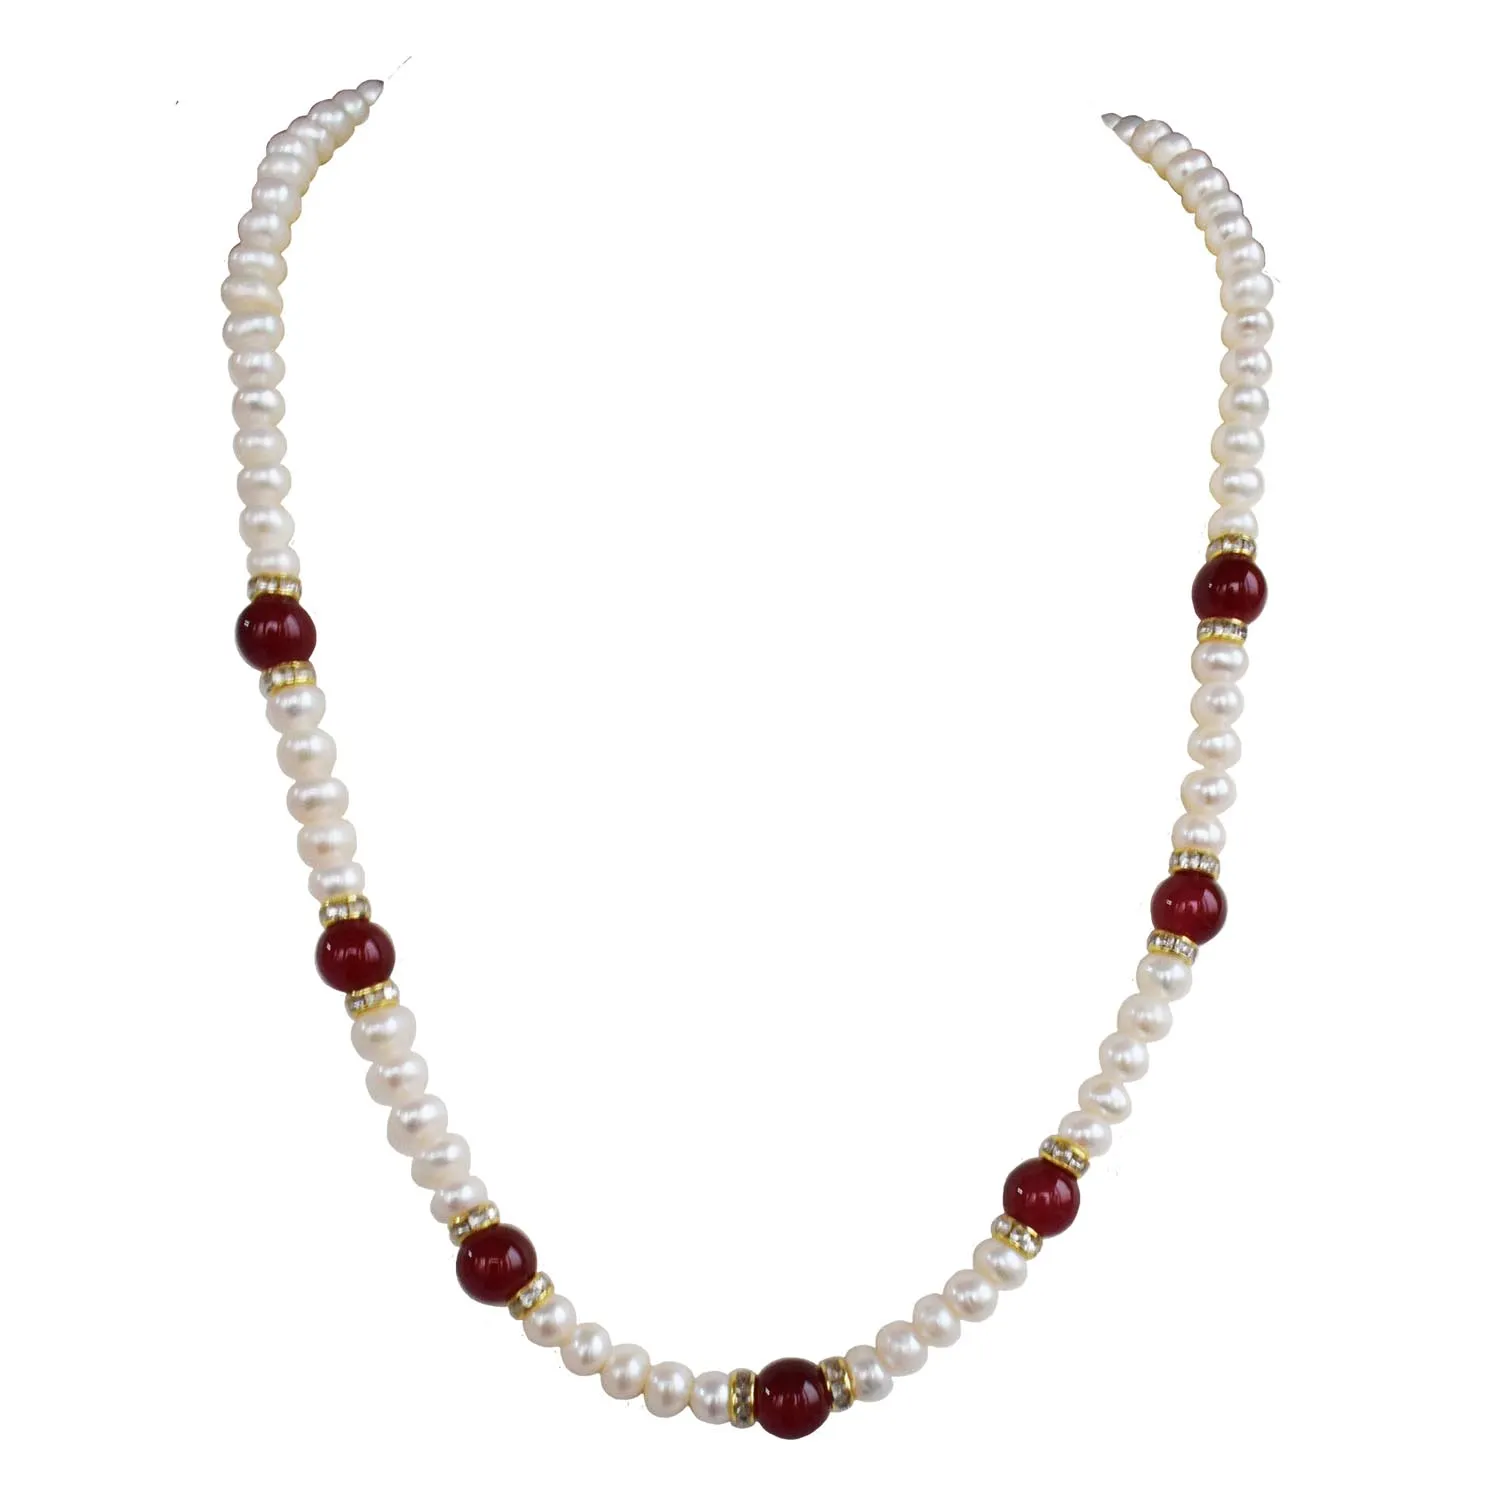 Single Line Real Pearl & Red Coloured Big Stone Necklace, Earrings, Ring, Bracelet Set (SN1029+Ring-1+SE65+SB75)